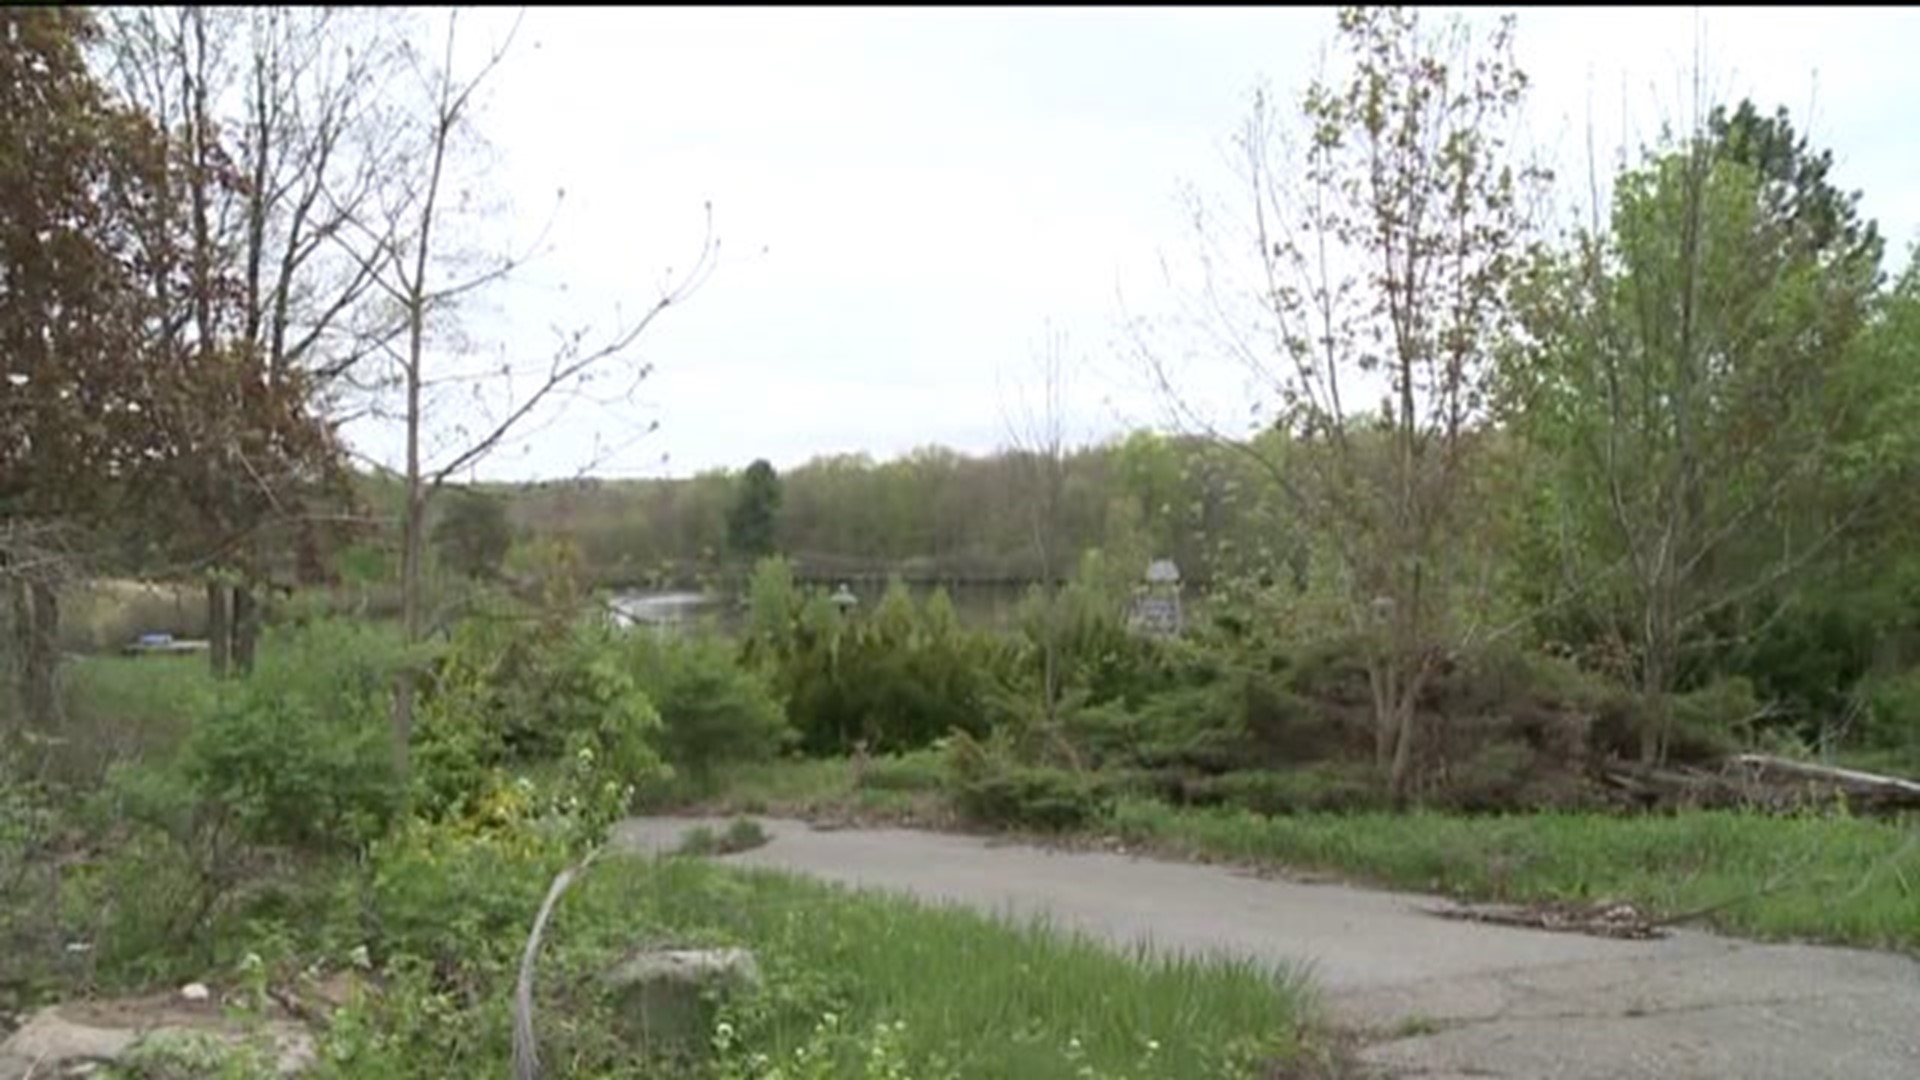 Movie, Shopping Complex Planned For Closed Pocono Resort